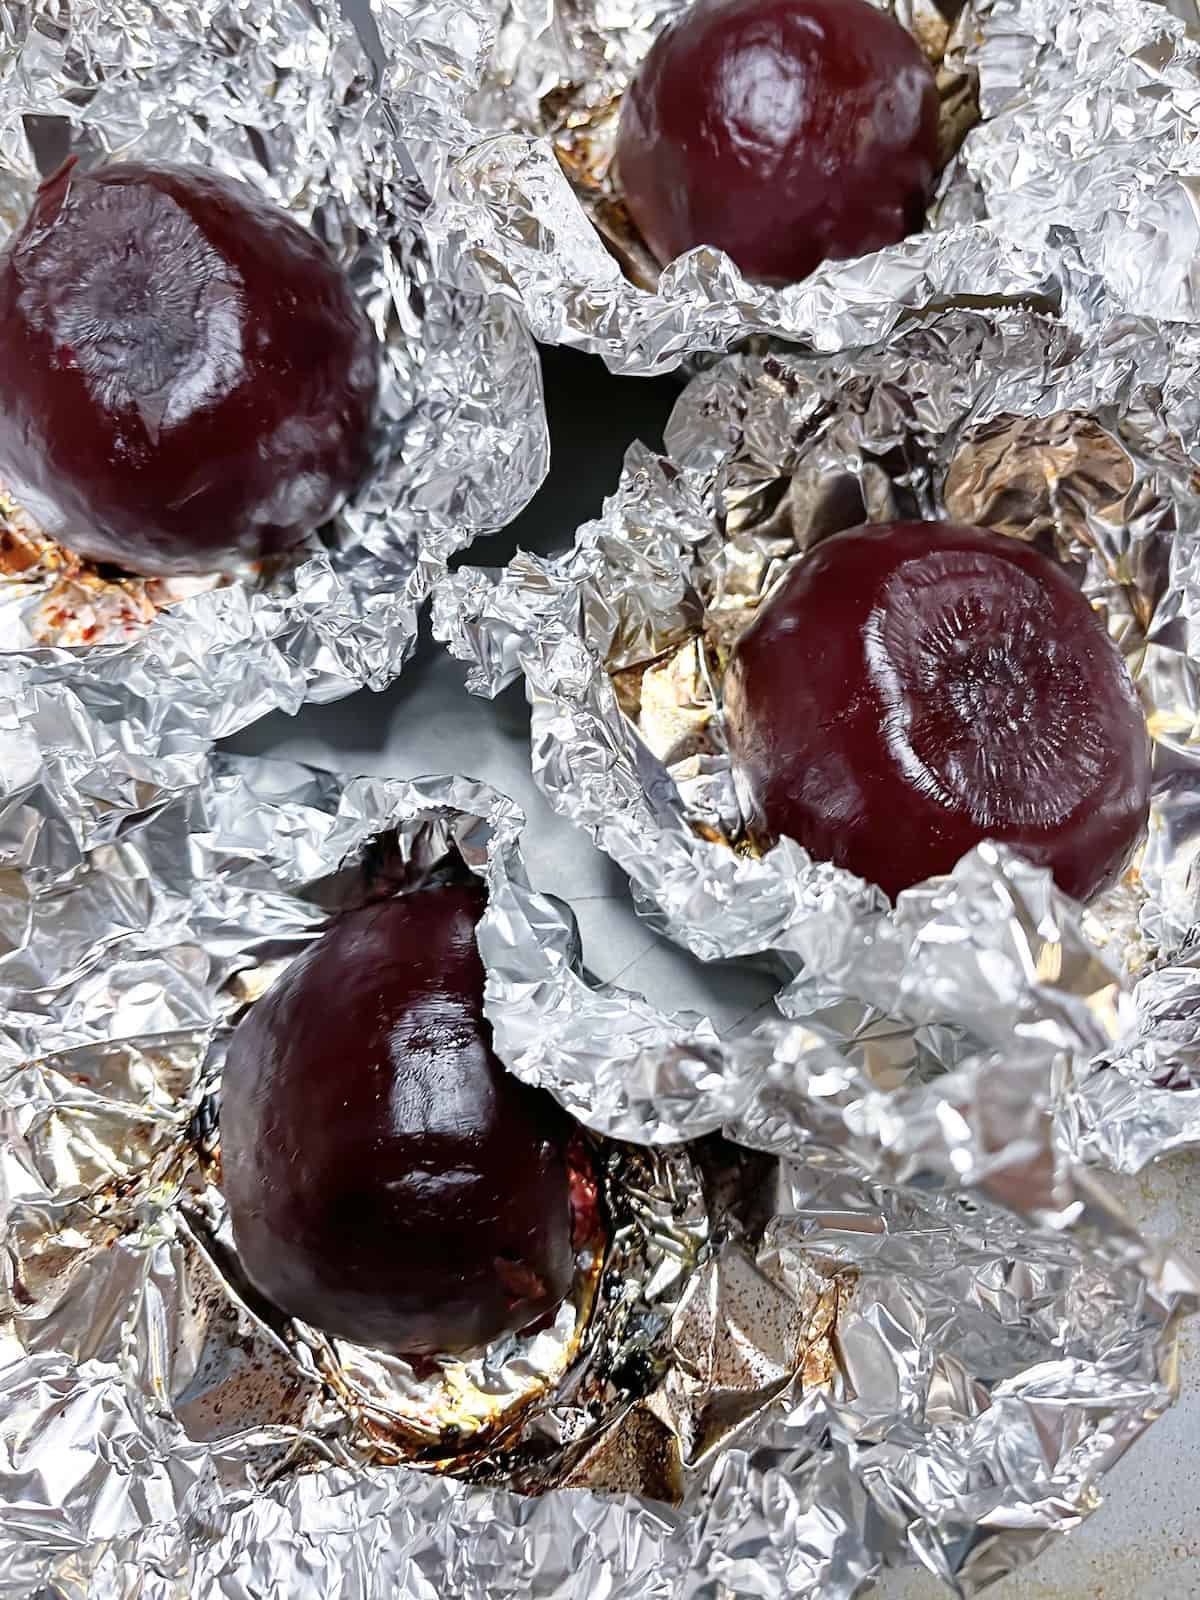 Roasted beets in foil with the foil packets open